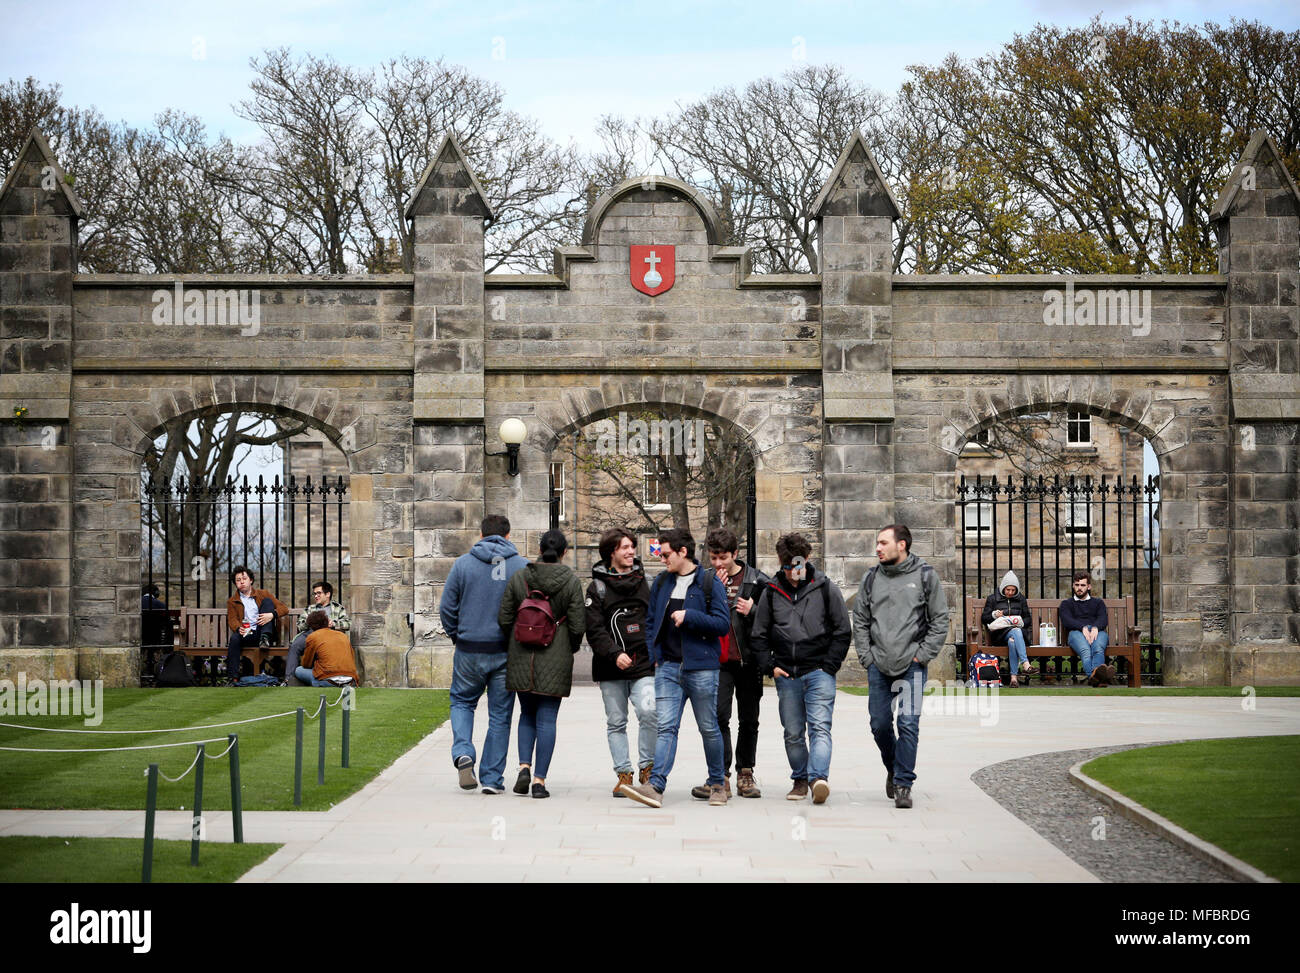 Students outside of the entrance to the Lower and Upper College Halls at the University of St Andrews. The University of St Andrews is top in Scotland and one of the five leading universities in the UK according to the new Complete University Guide's league table. Stock Photo